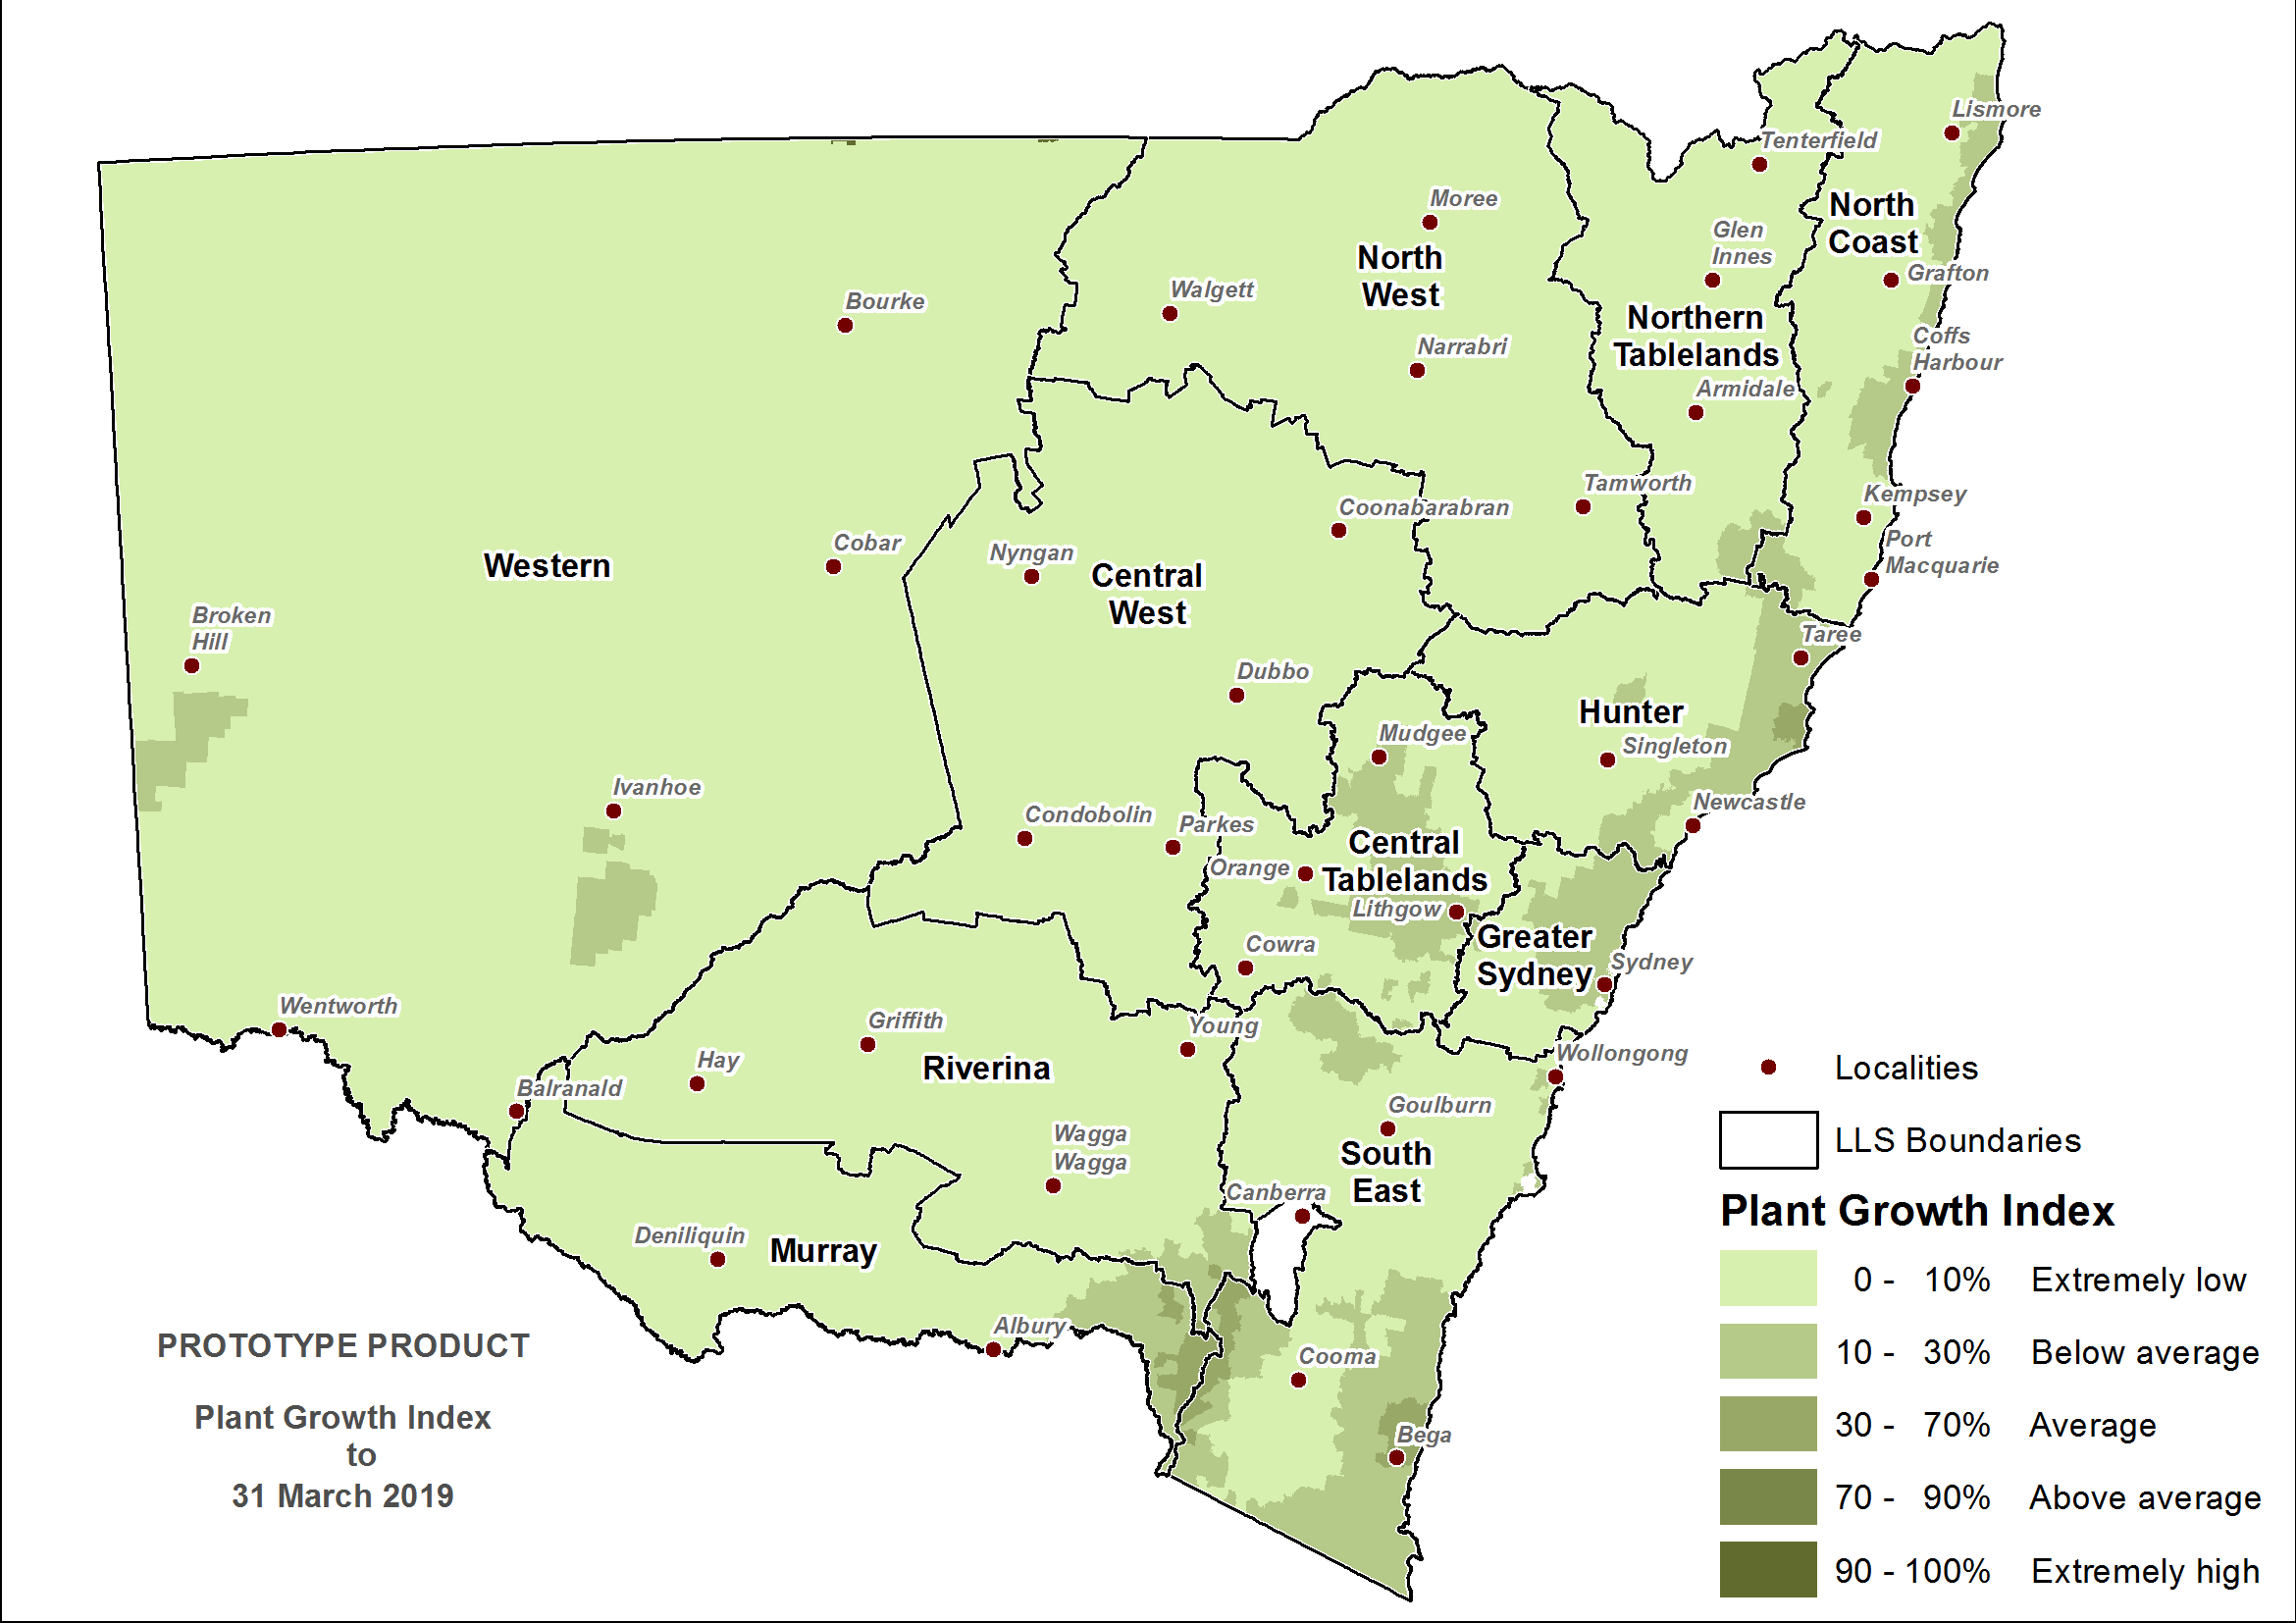 Plant Growth Index (PGI) to 31 March February 2019 - For an accessible explanation of this image contact scott.wallace@dpi.nsw.gov.au